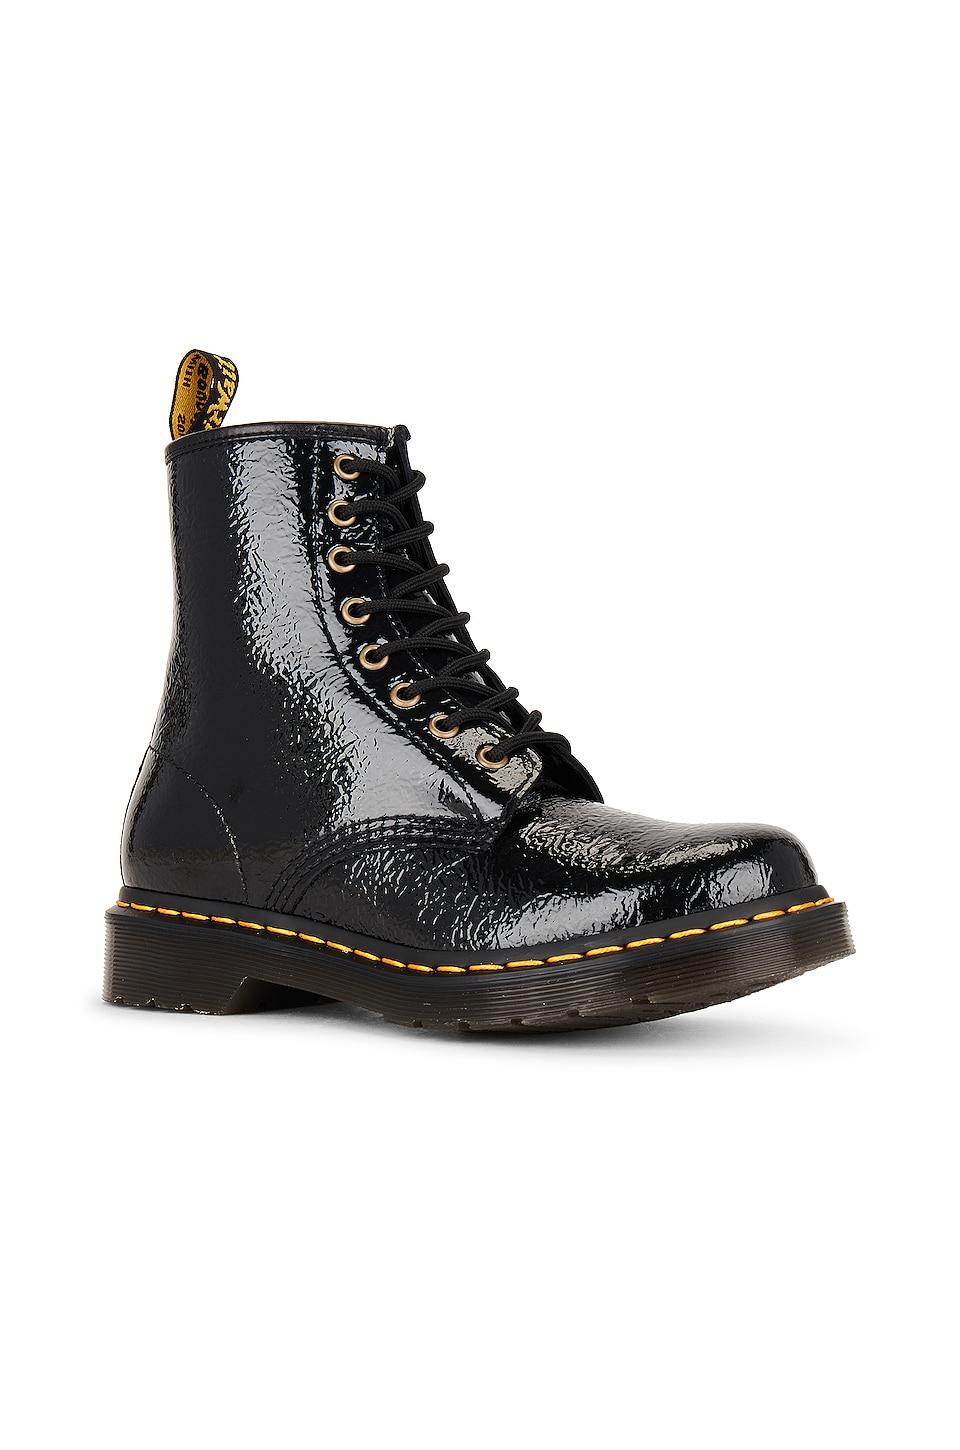 Dr. Martens 1460 Distressed Patent Boot in Black | Lyst